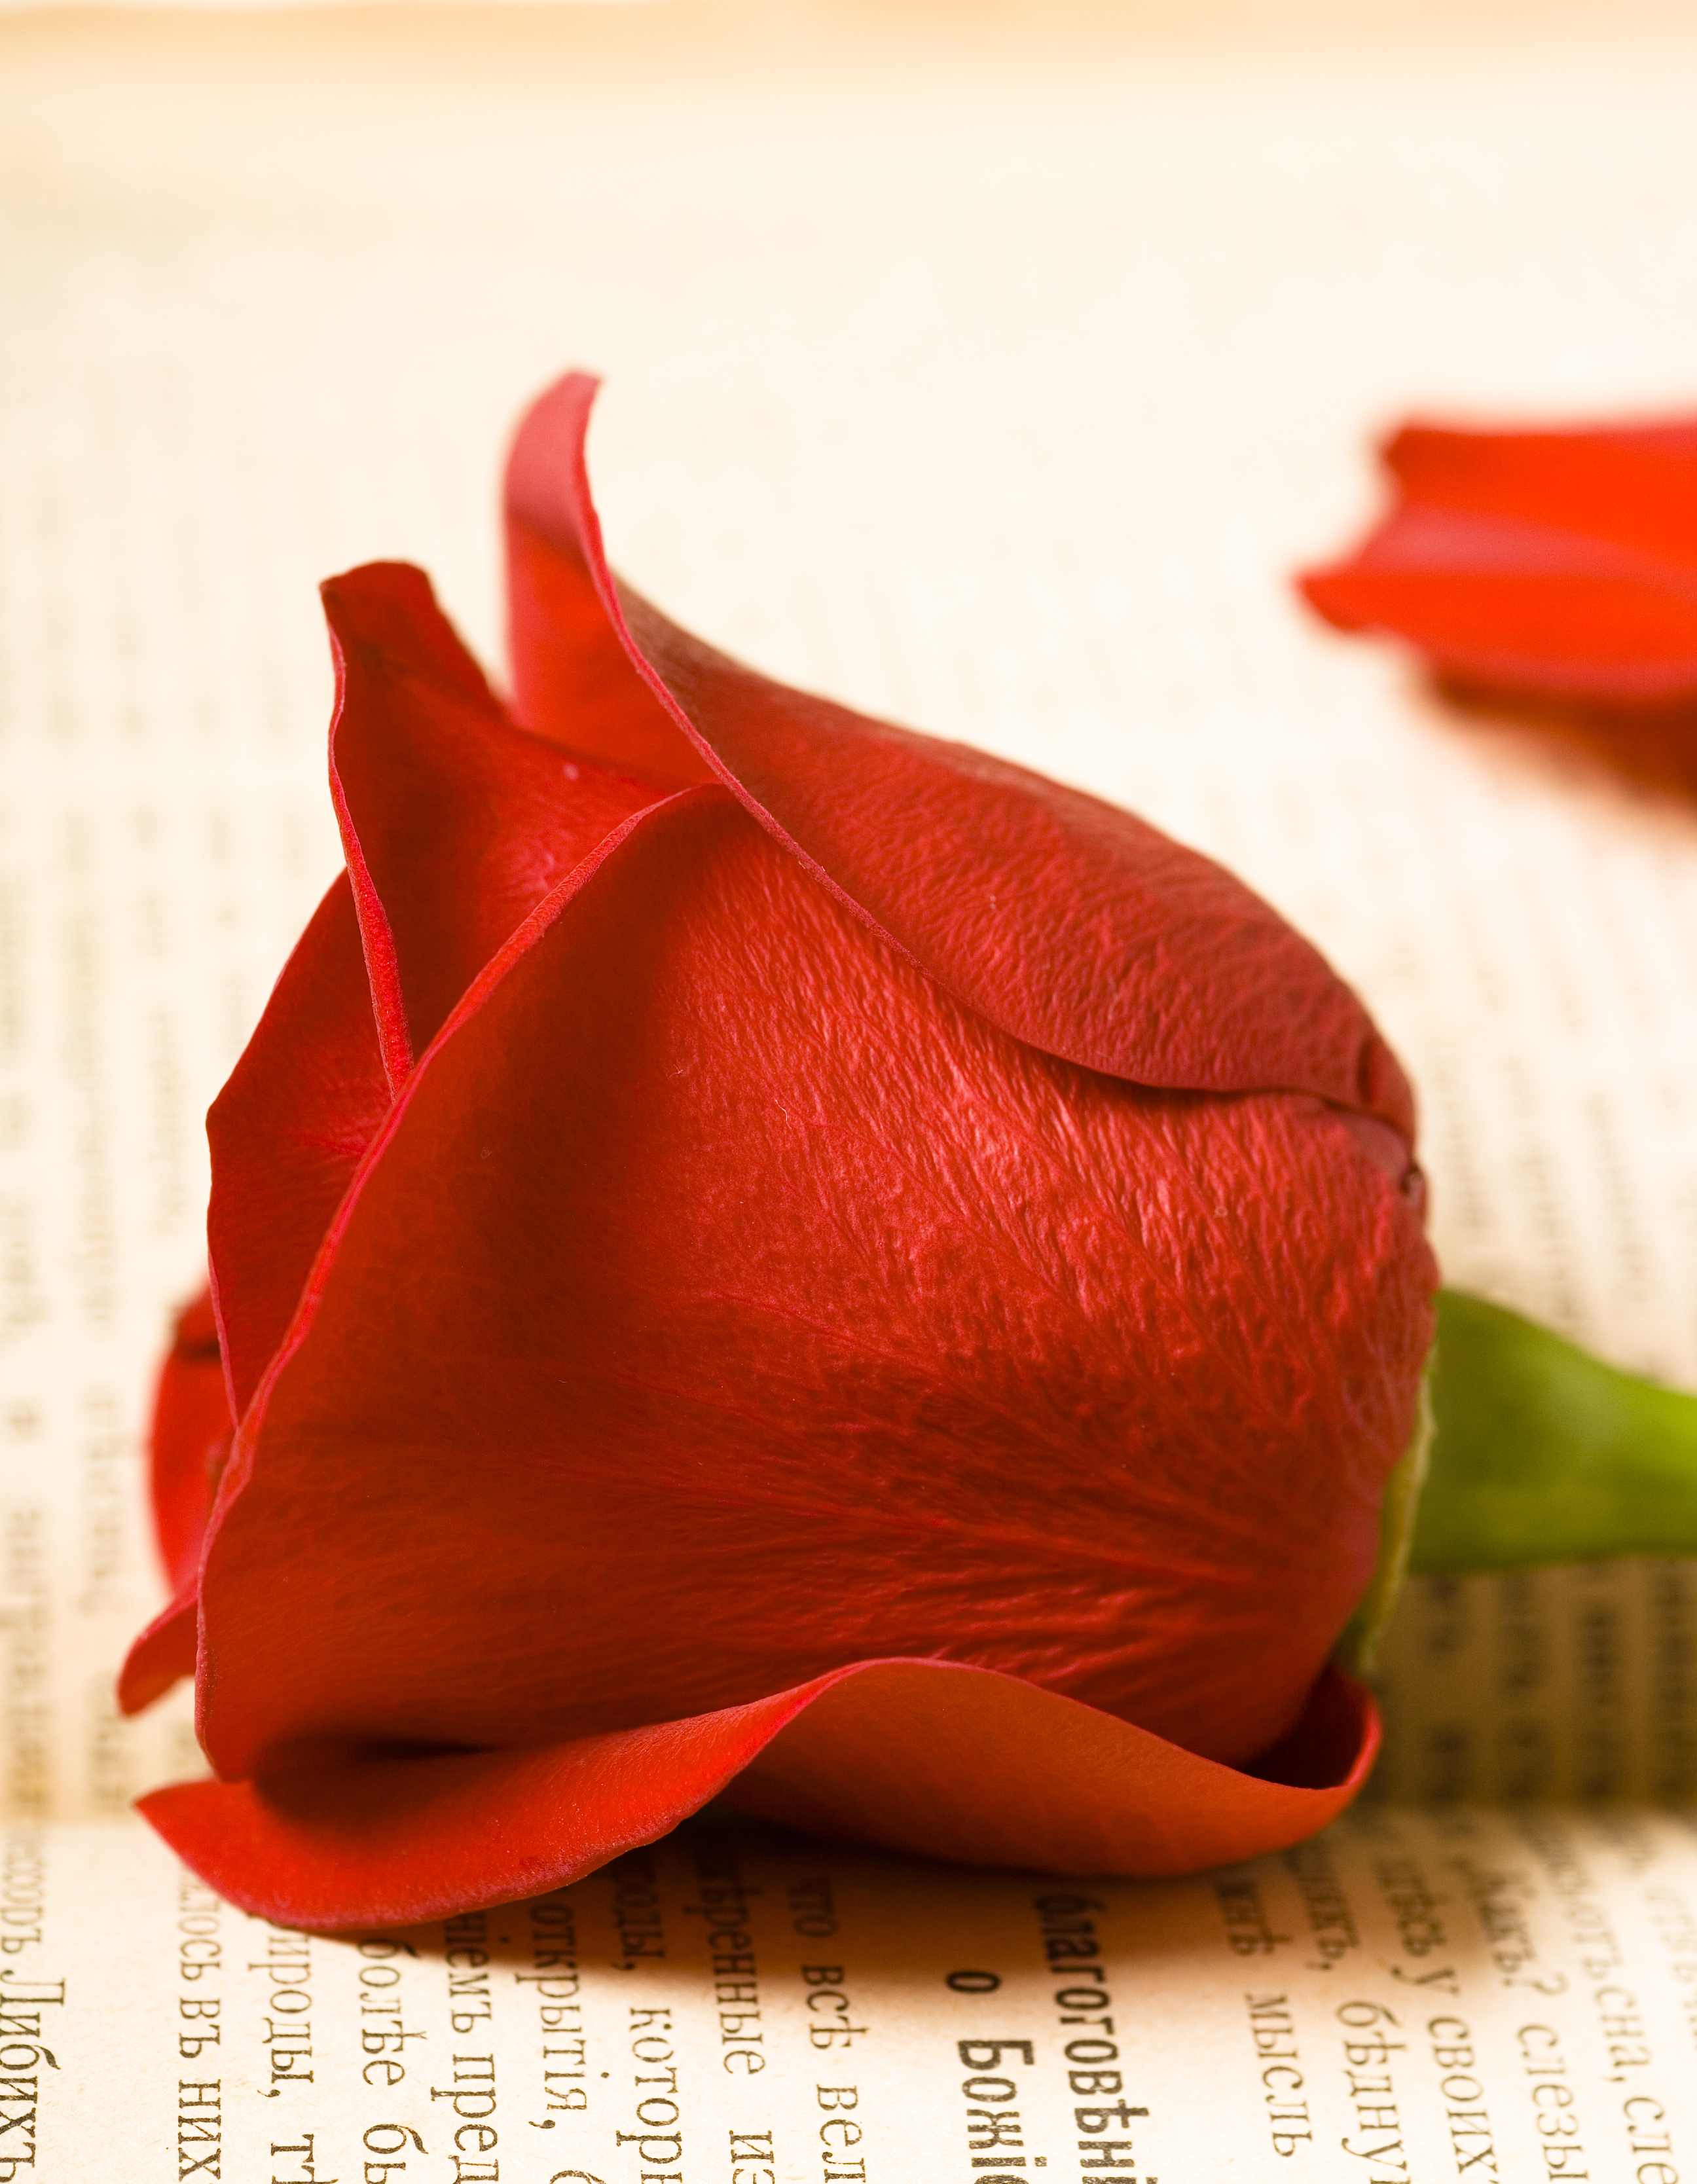 Red rose photo